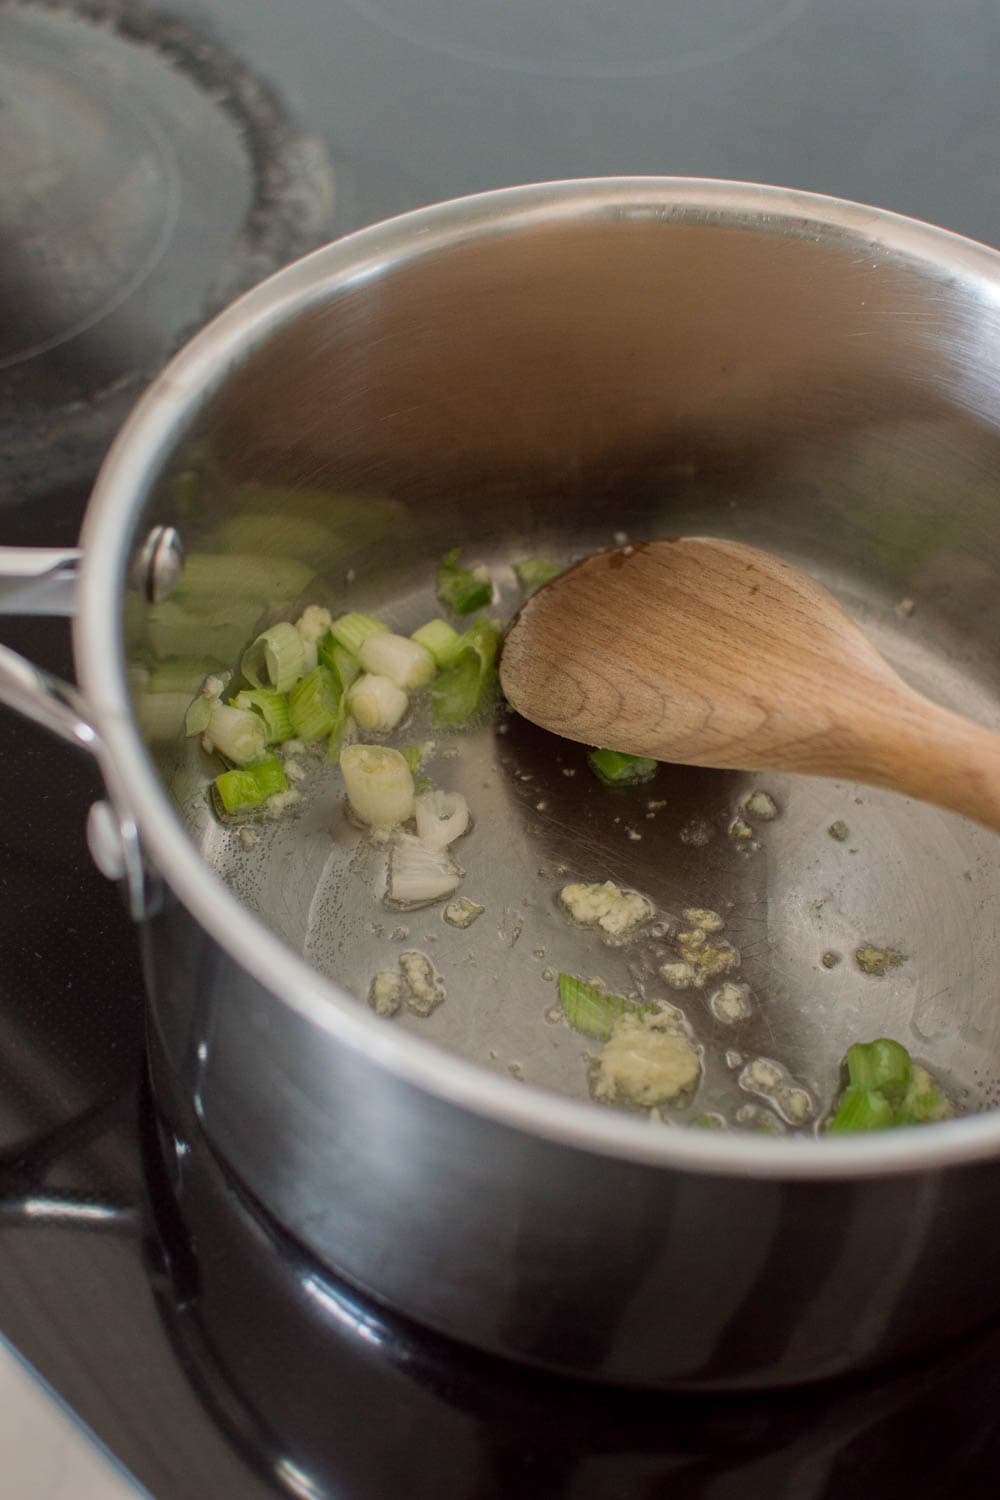 Simmering oil and green onions in a large saucepan, and mixing with a wooden spoon